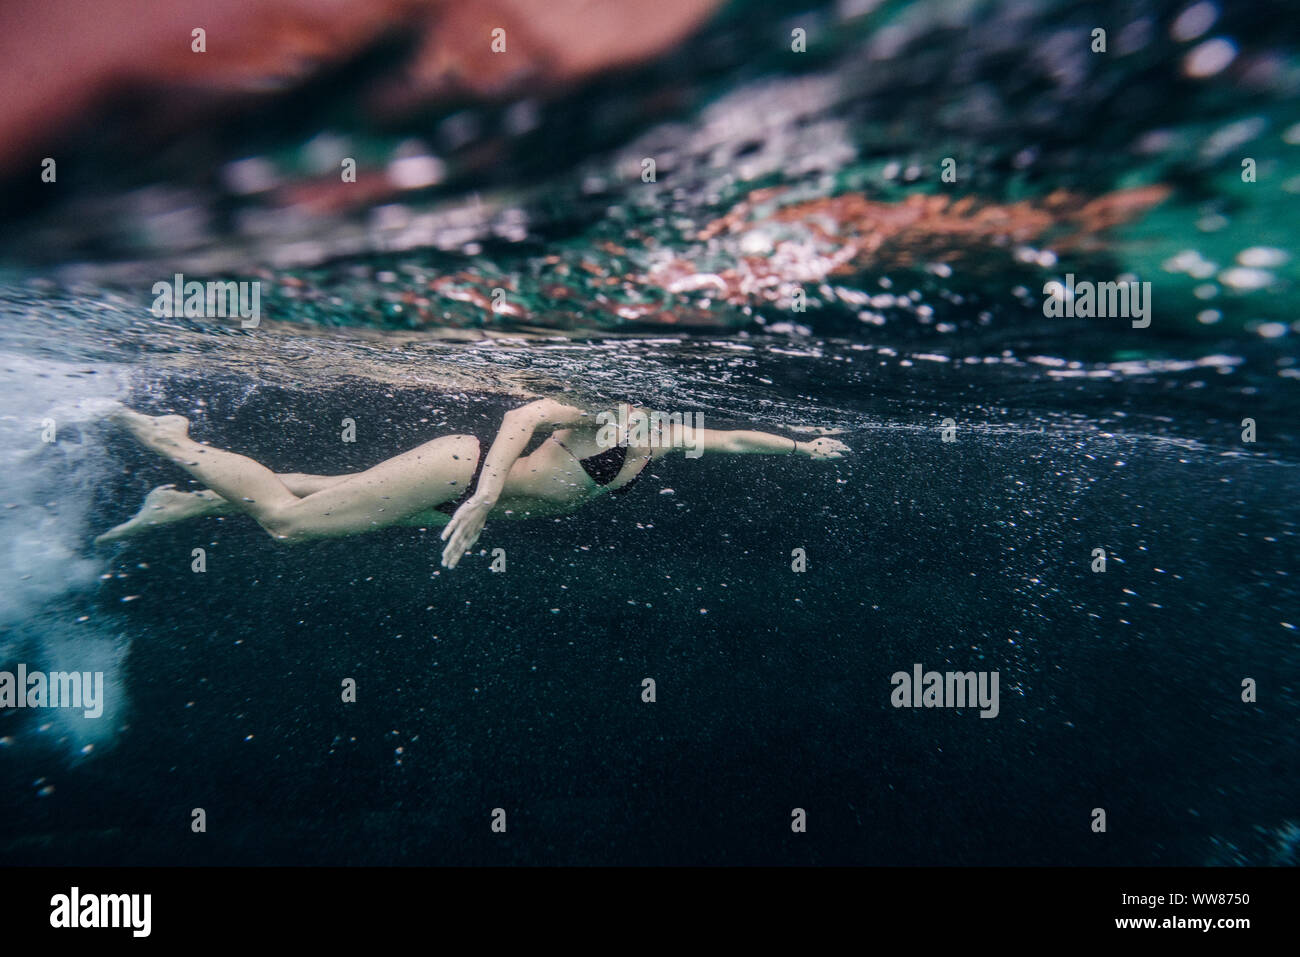 Full length of woman swimming underwater close to an old boat Stock Photo